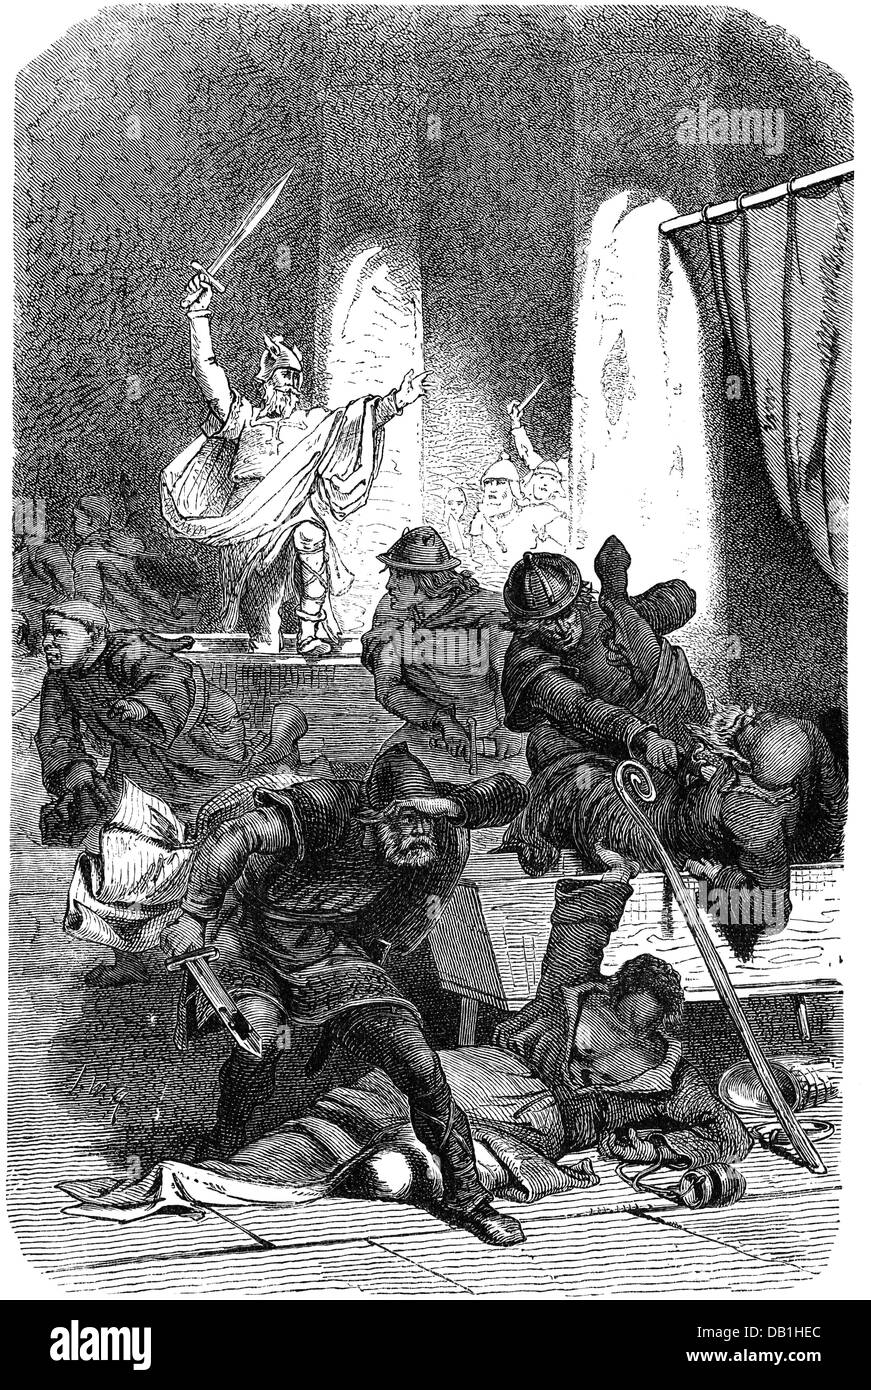 Middle Ages, Vikings, raid, Vikings under Hasting are conquering Luna, Italy, 860, wood engraving after drawing by Friedrich Wilhelm Heine, 1887, Germanics, Germanic people, Viking age, people, men, man, Luni, Liguria, trick, tricks, stratagem, stratagems, coffin, casket, coffins, caskets, pretend death, conquest, conquests, church, churches, Christian monk, 9th century, raid, raids, Viking, Vikings, conquering, conquer, conquers, historic, historical, medieval, male, Additional-Rights-Clearences-Not Available Stock Photo